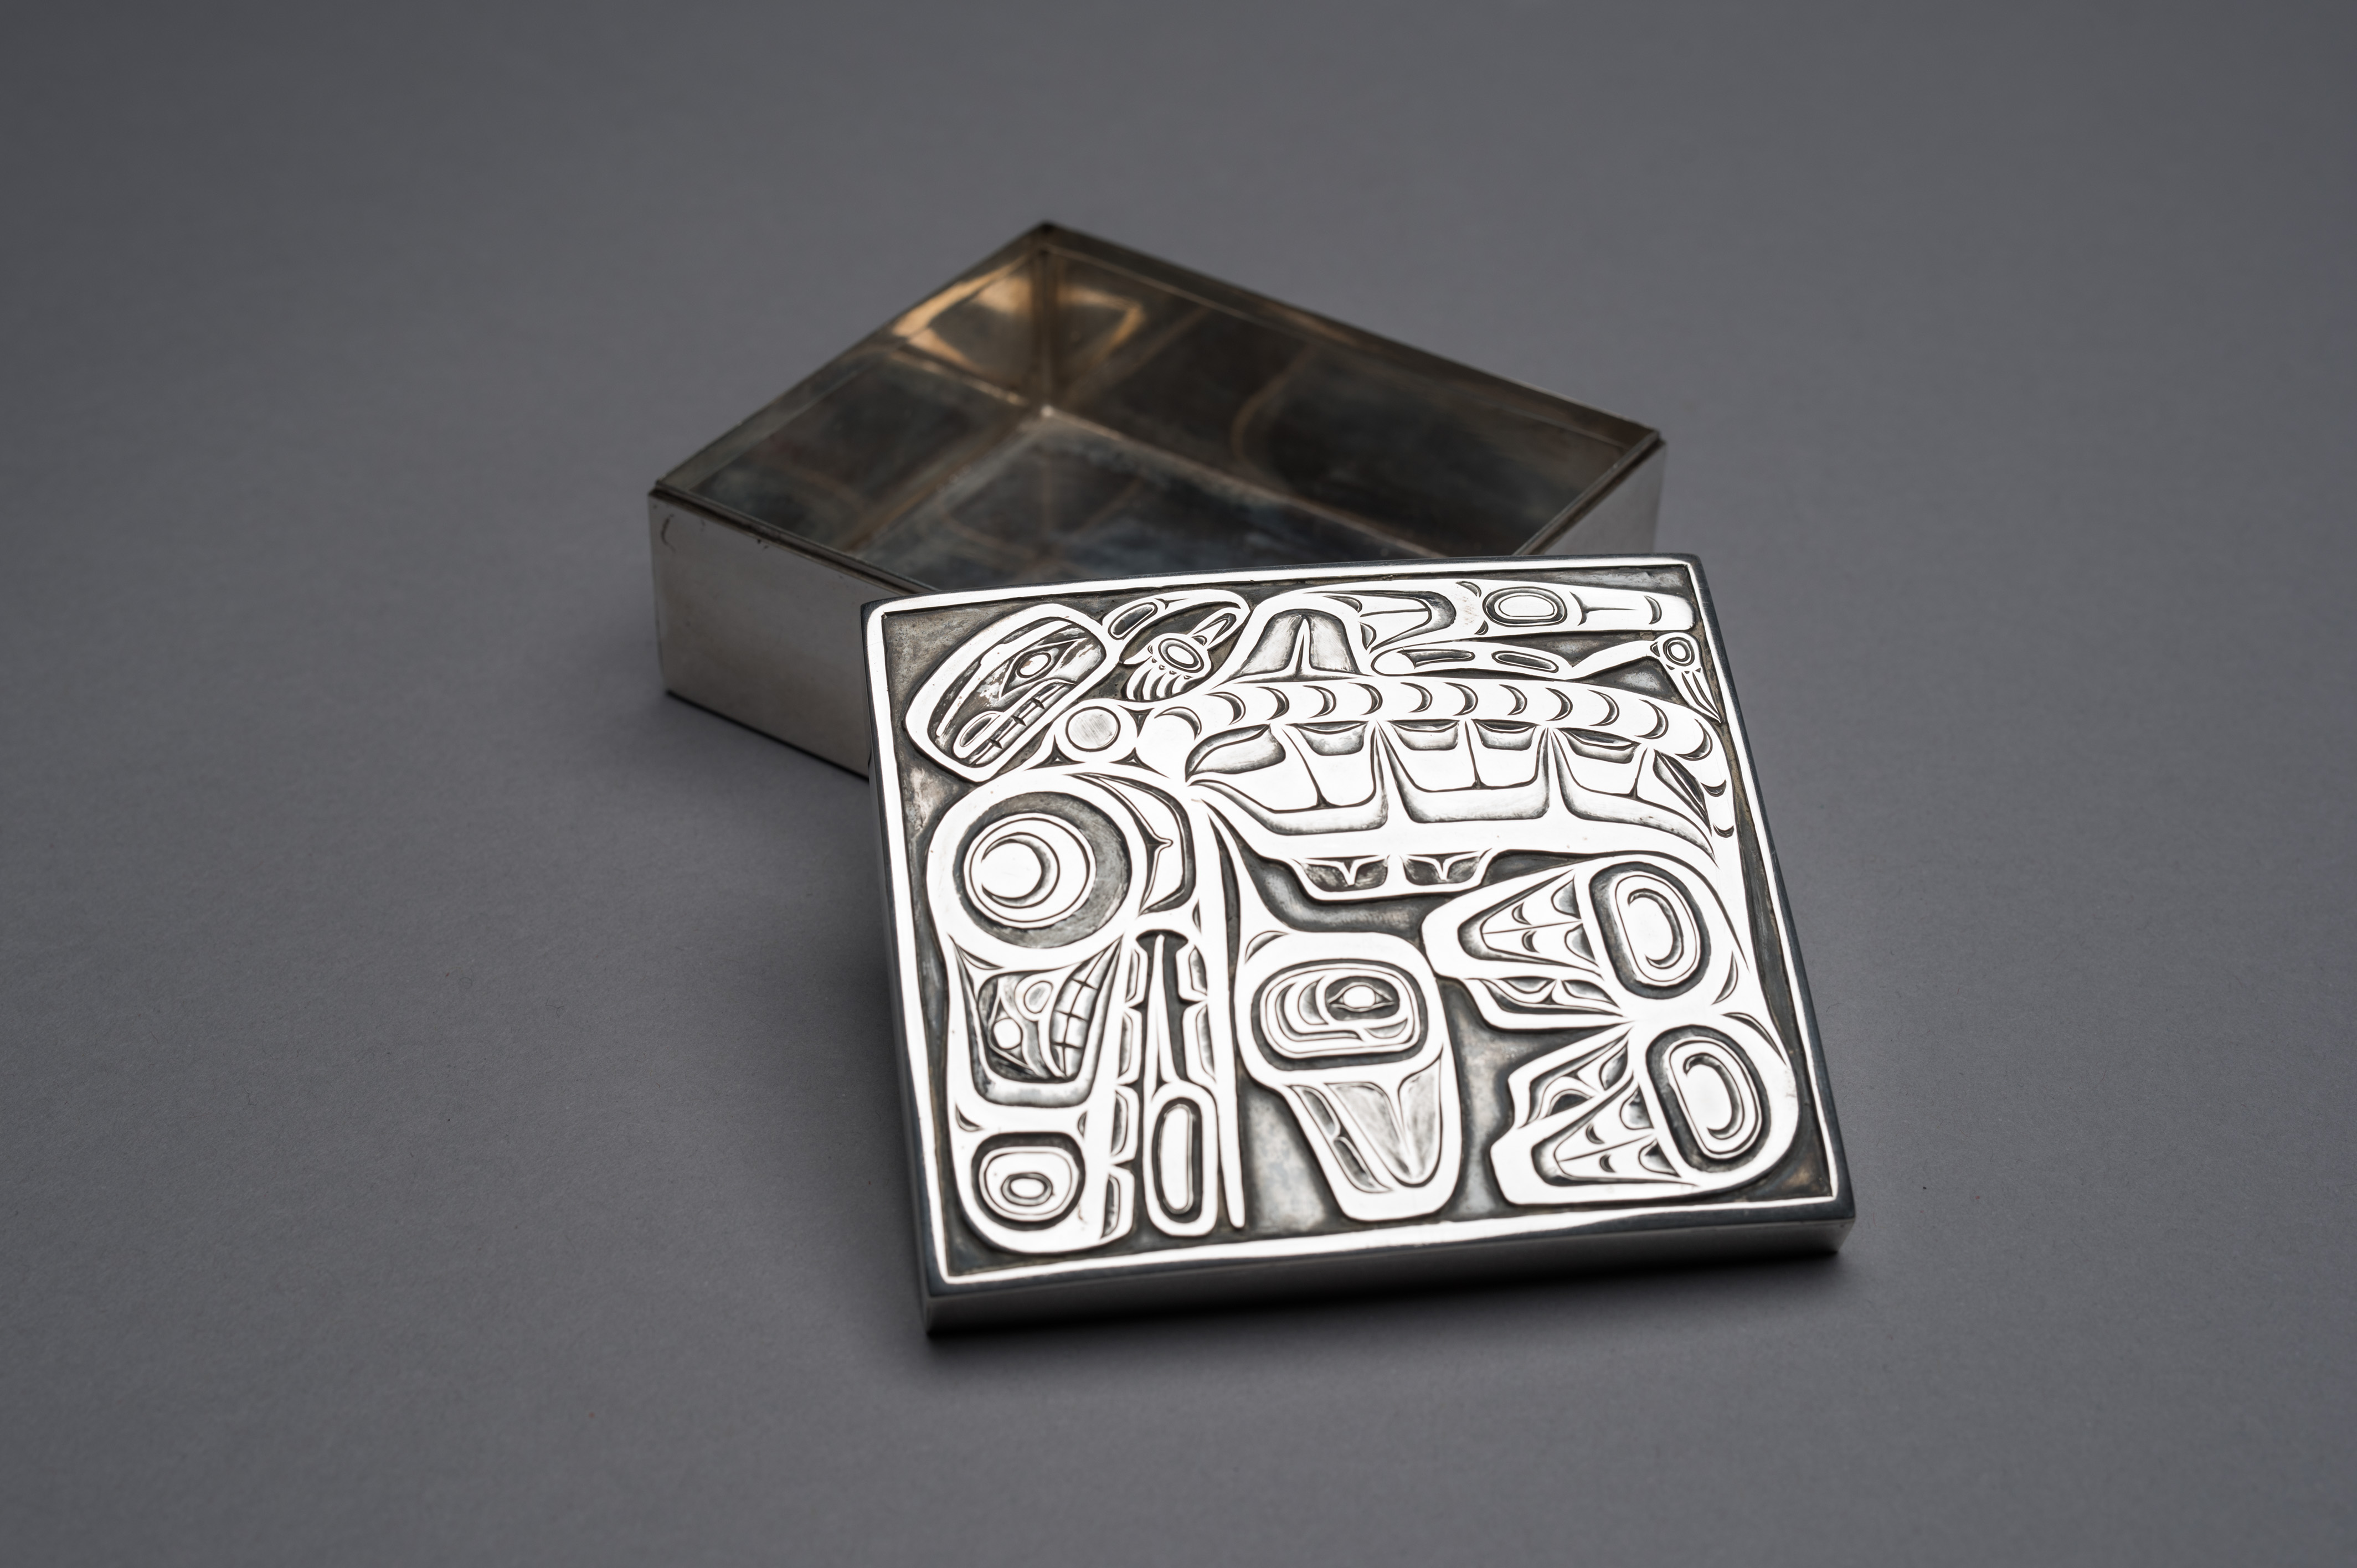 A silver box with a killer-whale motif created by renowned Haida artist Bill Reid circa 1958 is part of a collection donated to the Museum of Anthropology by late Calgary philanthropist Margaret (Marmie) Perkins Hess. Credit: Martin Dee/University of British Columbia